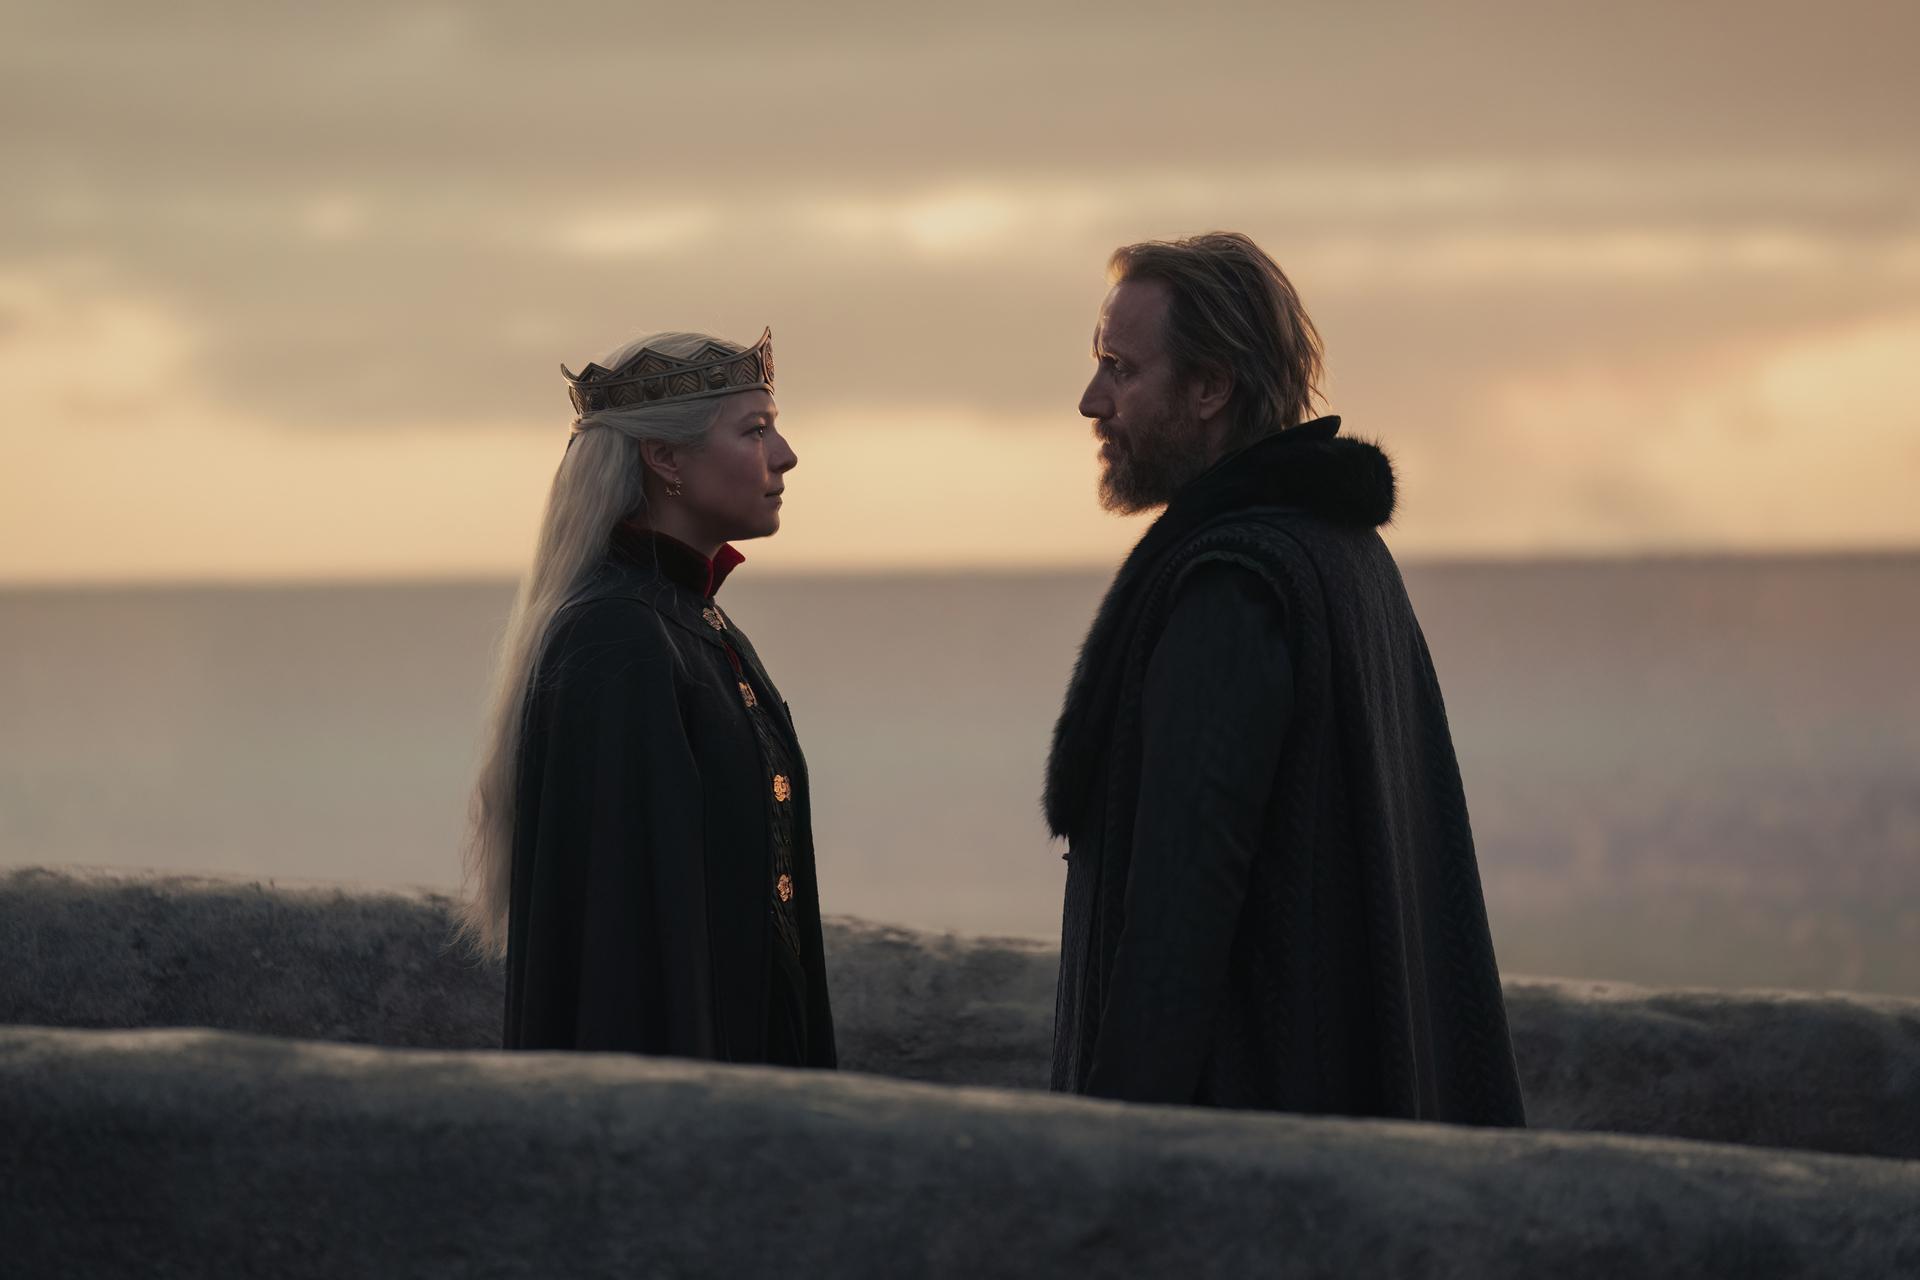 Rhys Ifans and Emma D’Arcy in House of the Dragon Season 1.